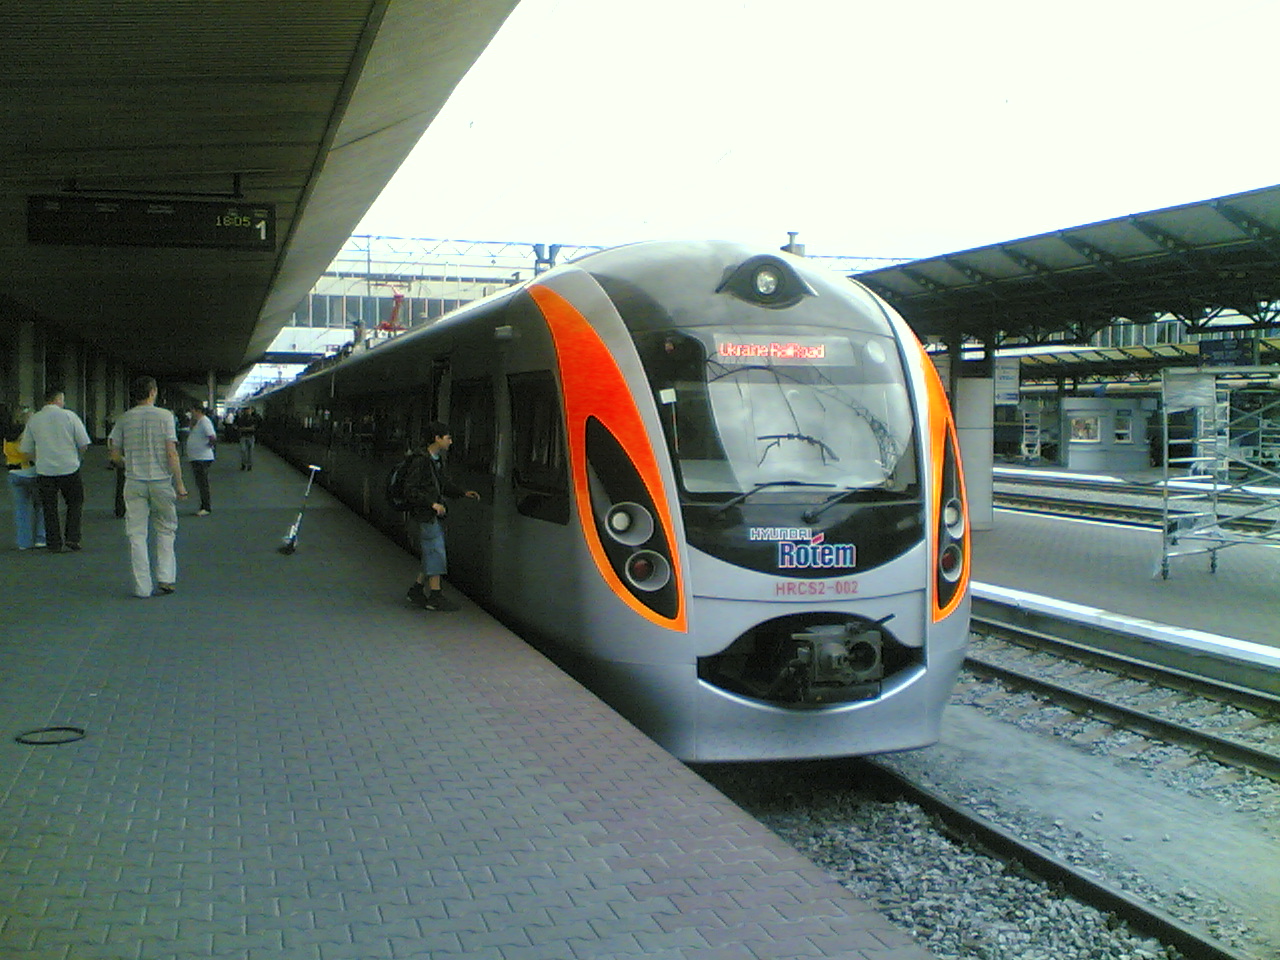 a large long train on a steel track